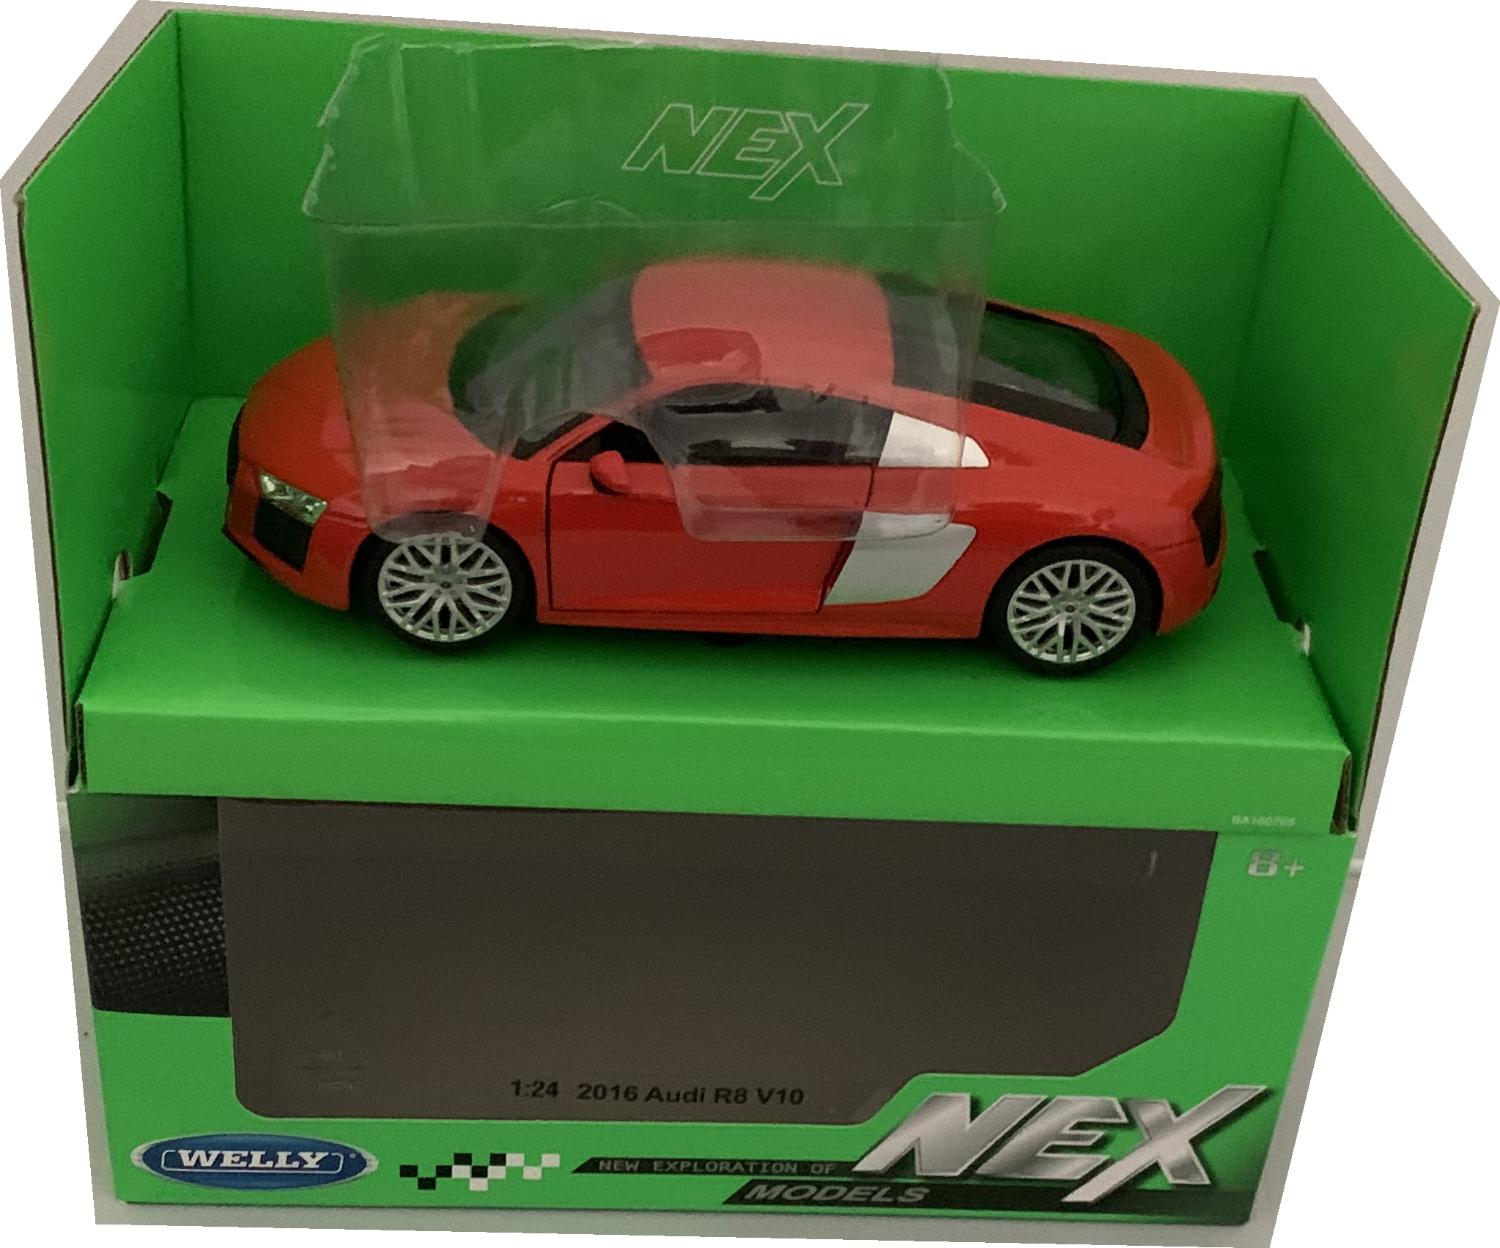 An excellent reproduction of the Audi R8 V10 with high level of detail throughout, all authentically recreated.  The model is presented in a window display box, the car is approx. 18 cm long and the presentation box is 24 cm long